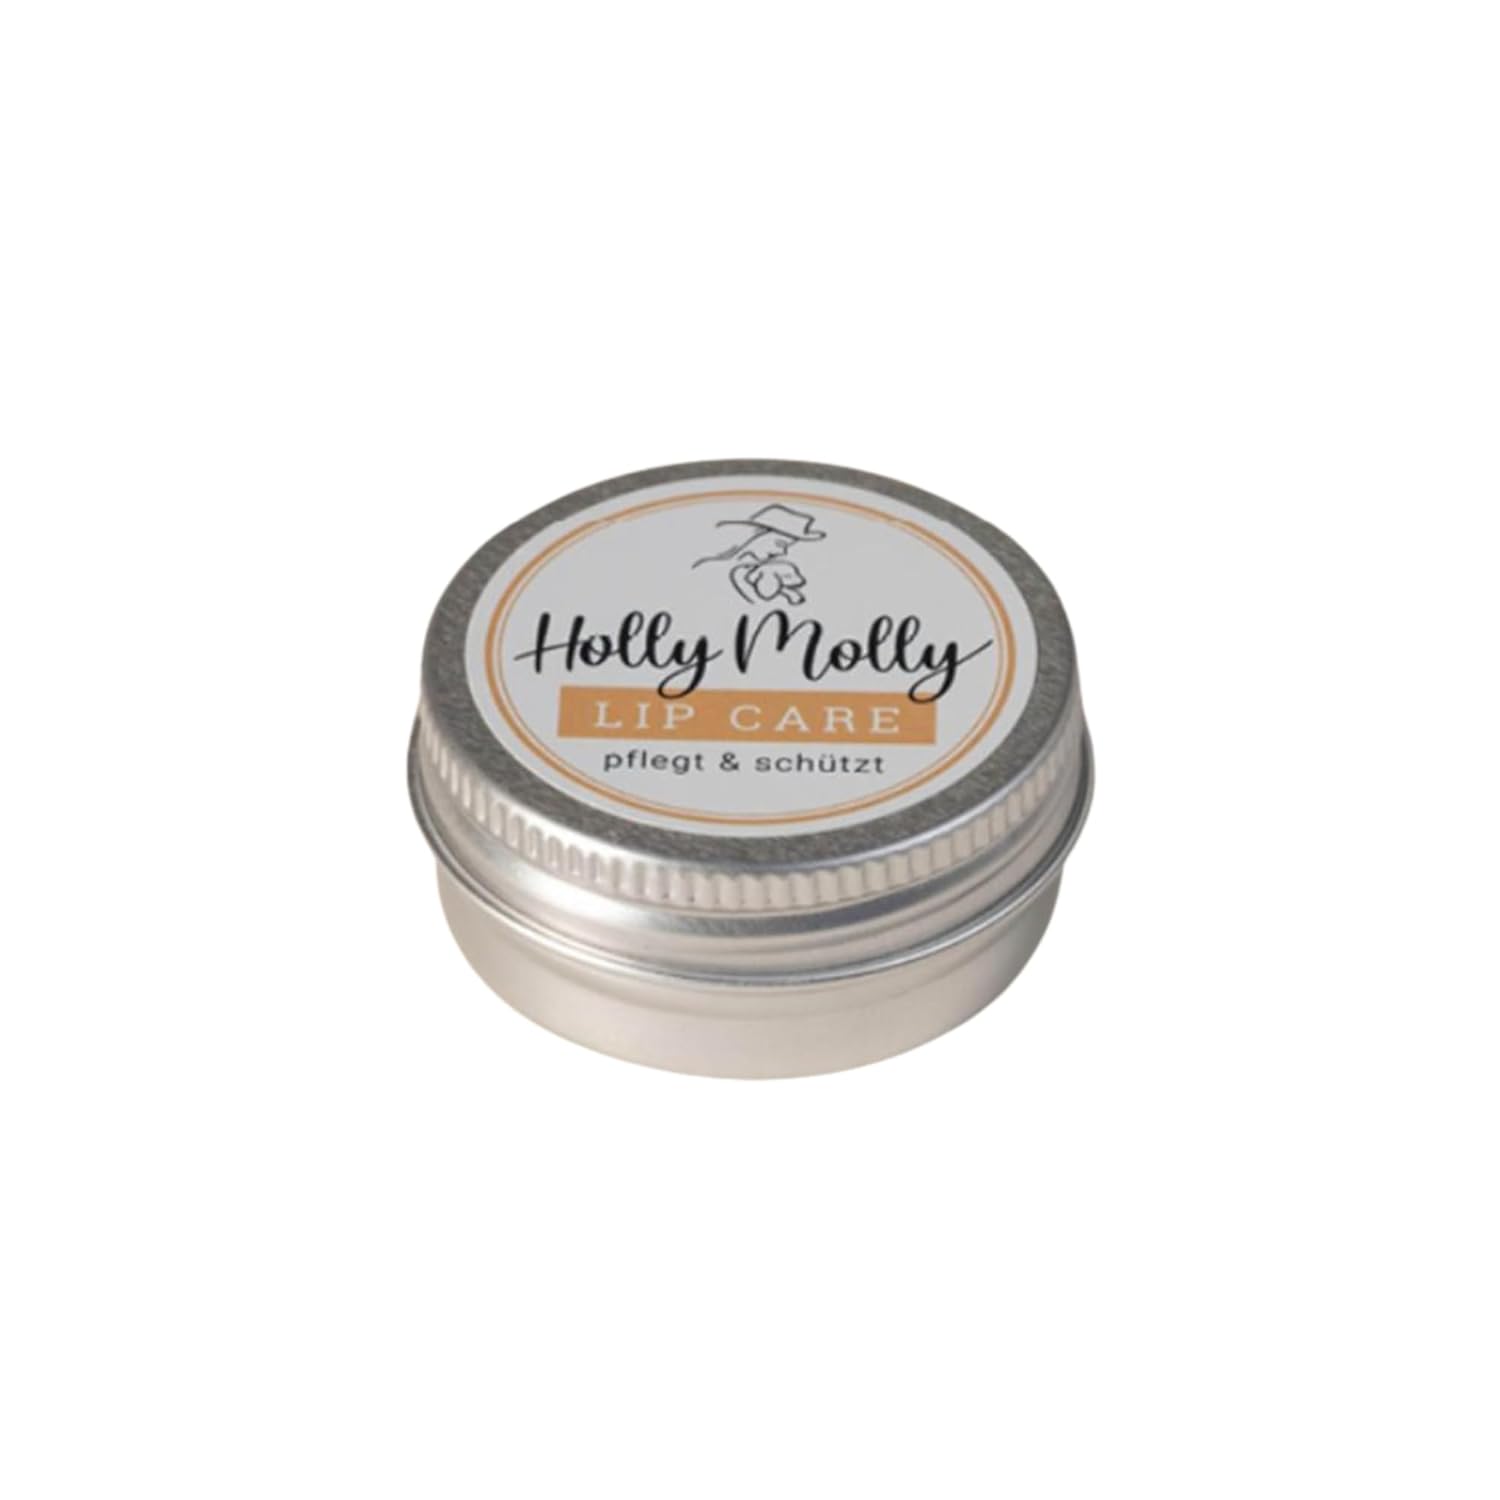 Holly Molly - Soothing and Moisturizing Lip Balm 15ml: 100% Lanolin to transform your lips and provide a natural and nourished beauty experience